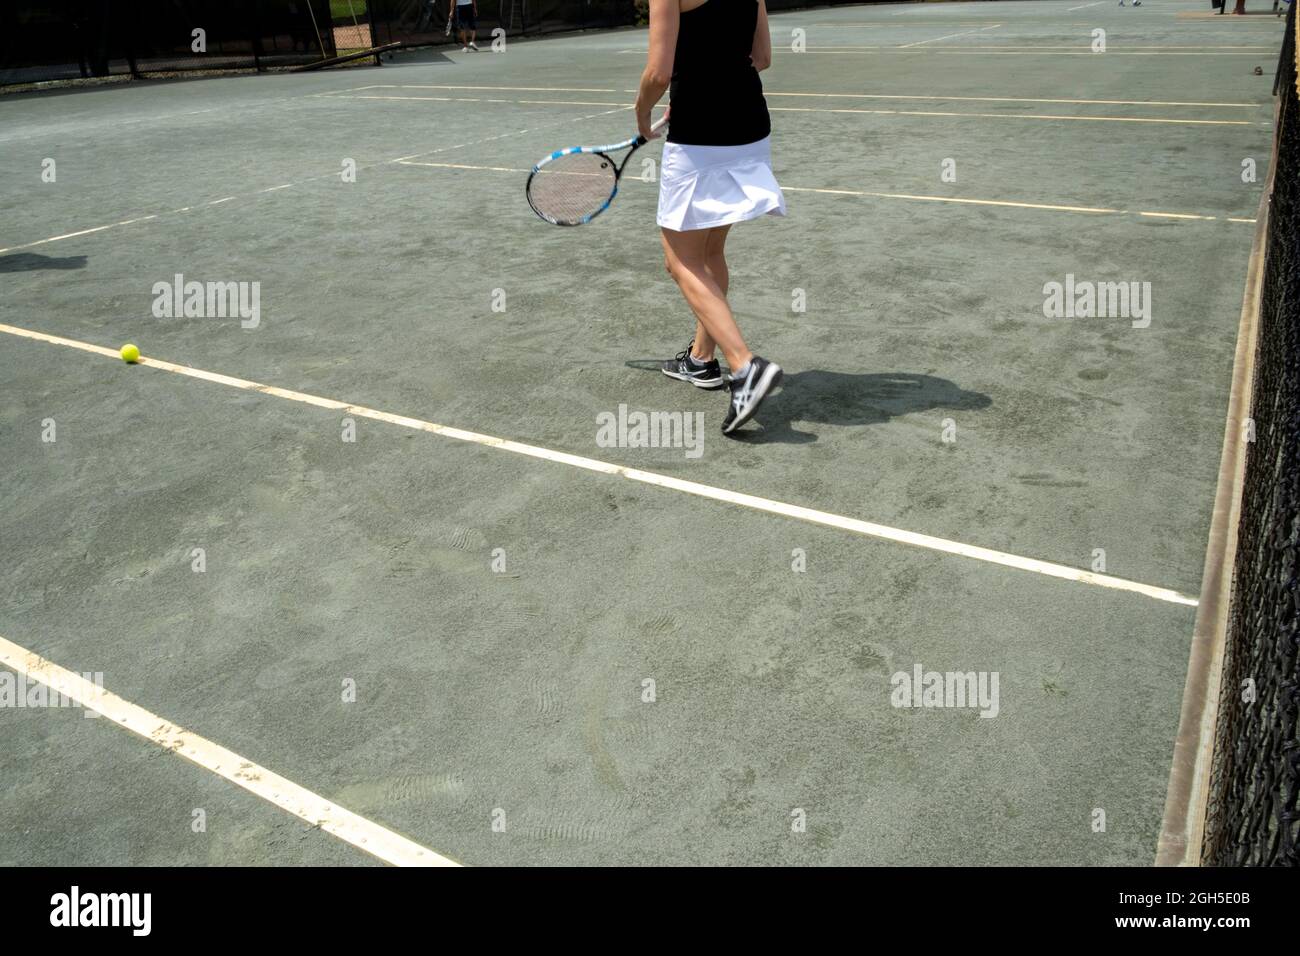 Woman on tennis court during a tennis match Stock Photo